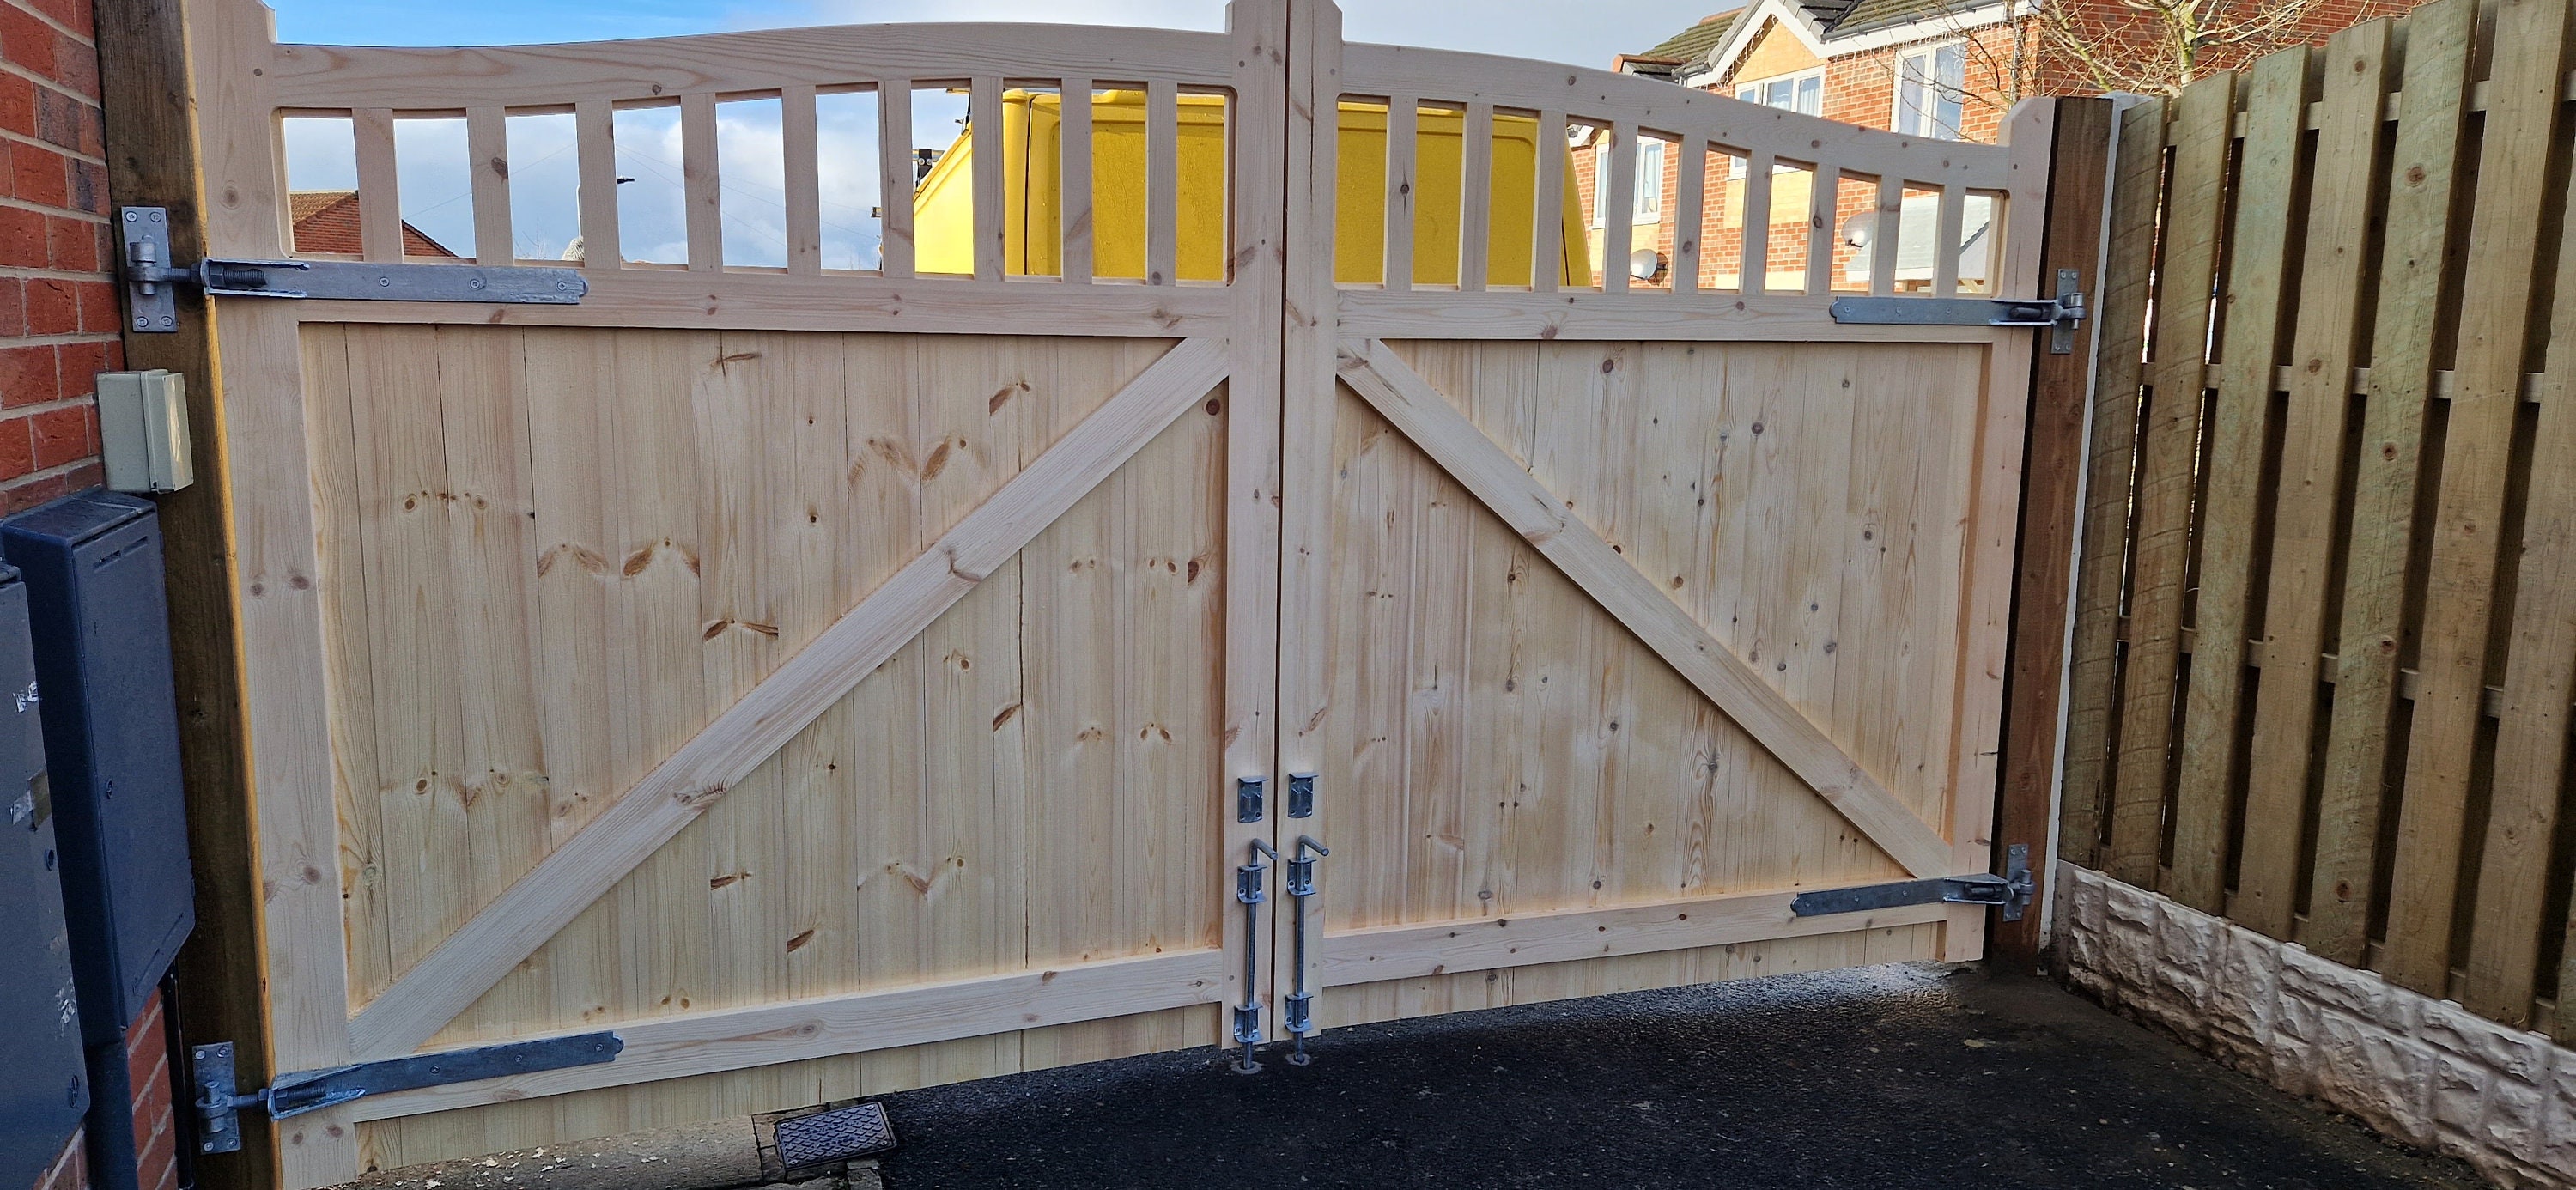 Driveway Gates Wooden Swan Neck Cottage Style Bespoke Made to